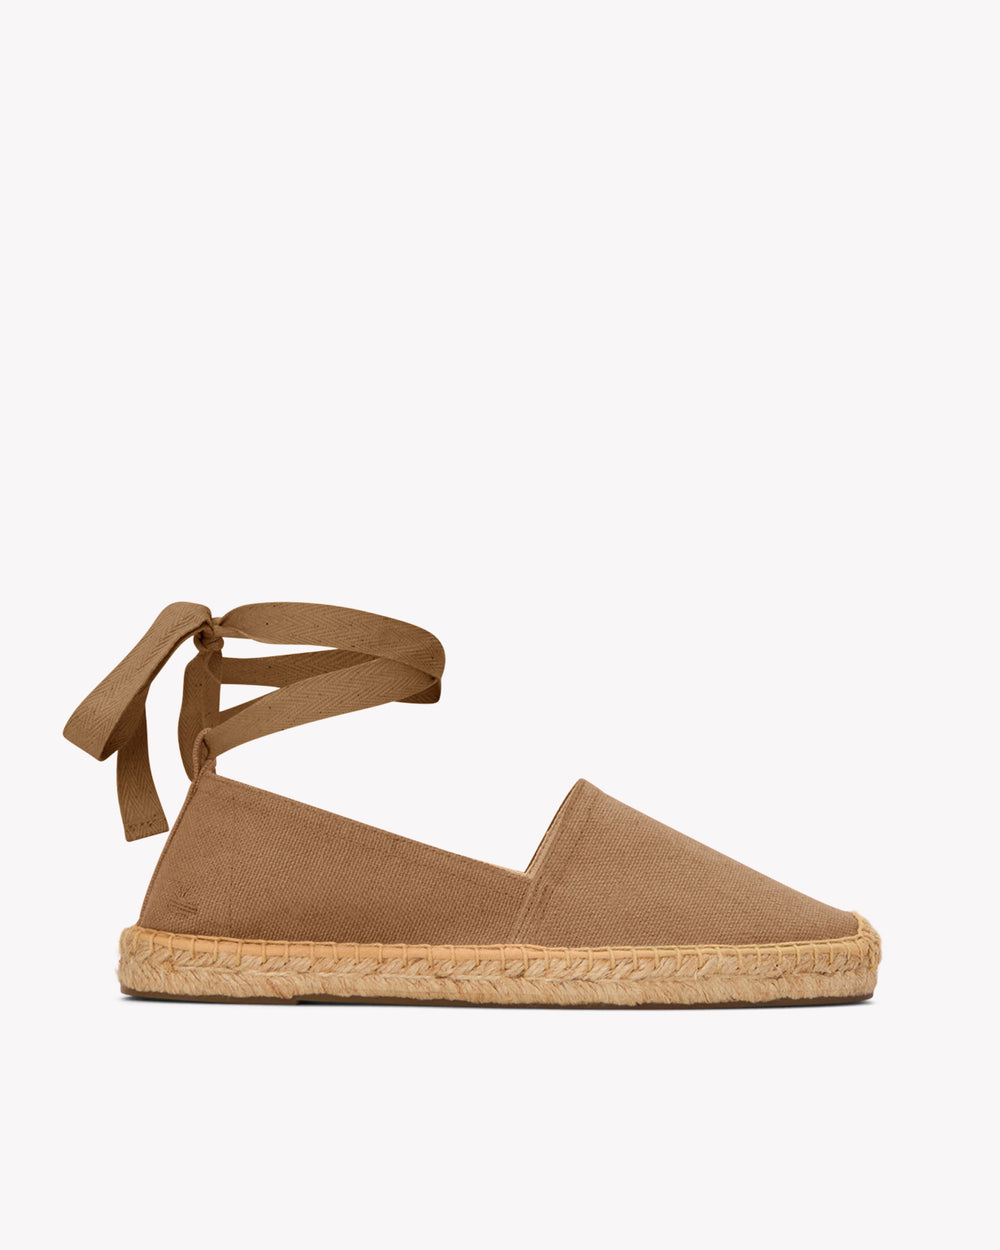 The Original Lace Up Espadrille - Cafe Taupe - Women's